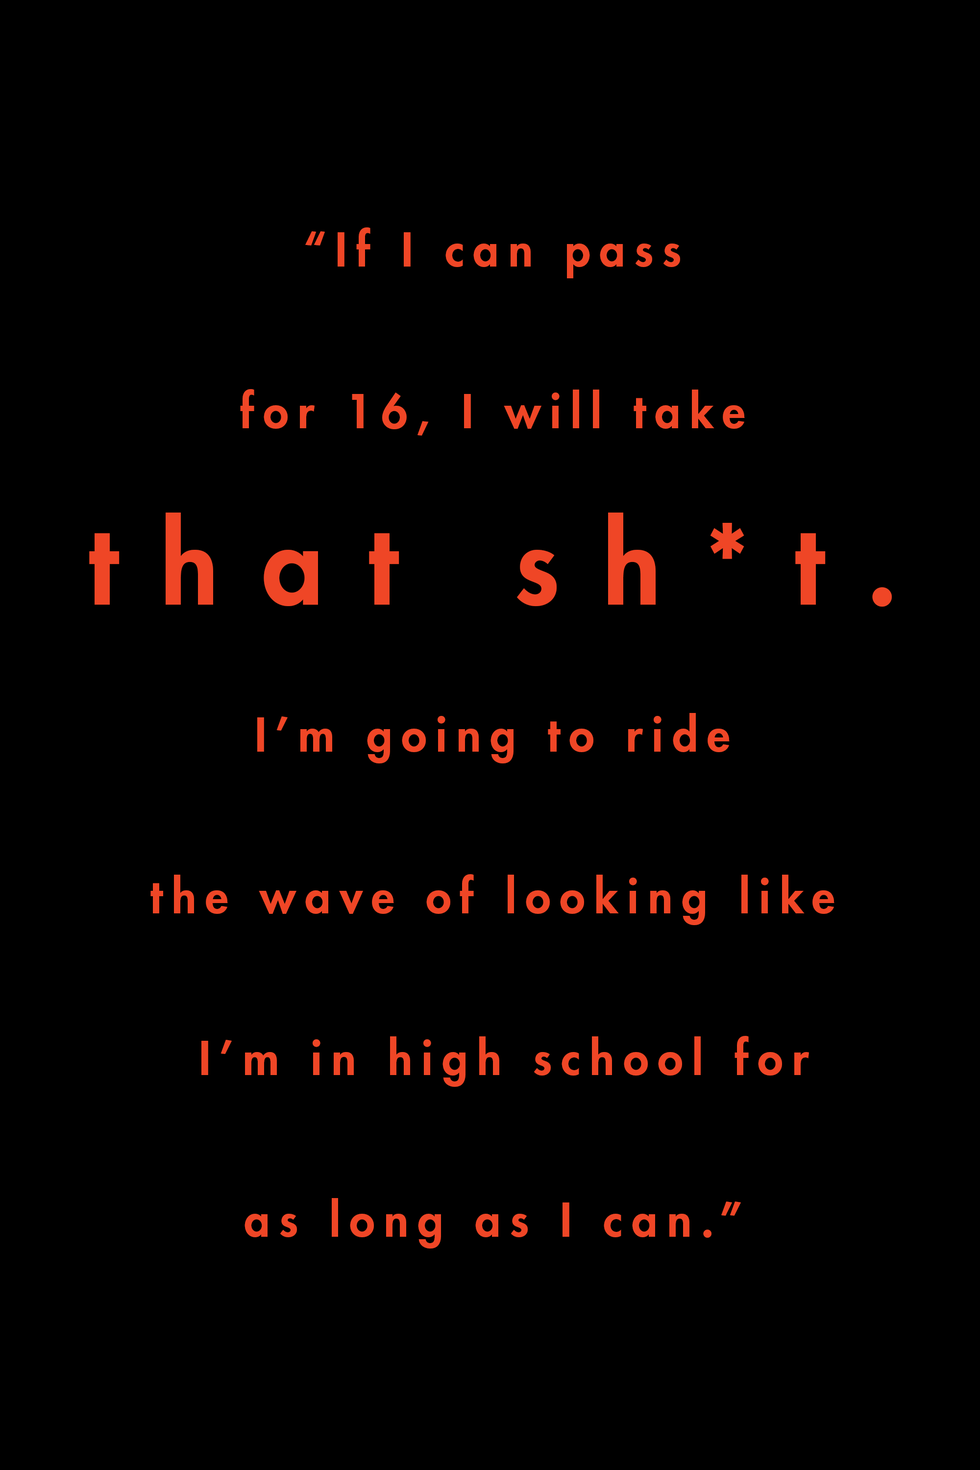 red text on black background reads “if i can pass for 16, i will take that sht i’m going to ride the wave of looking like i’m in high school for as long as i can”